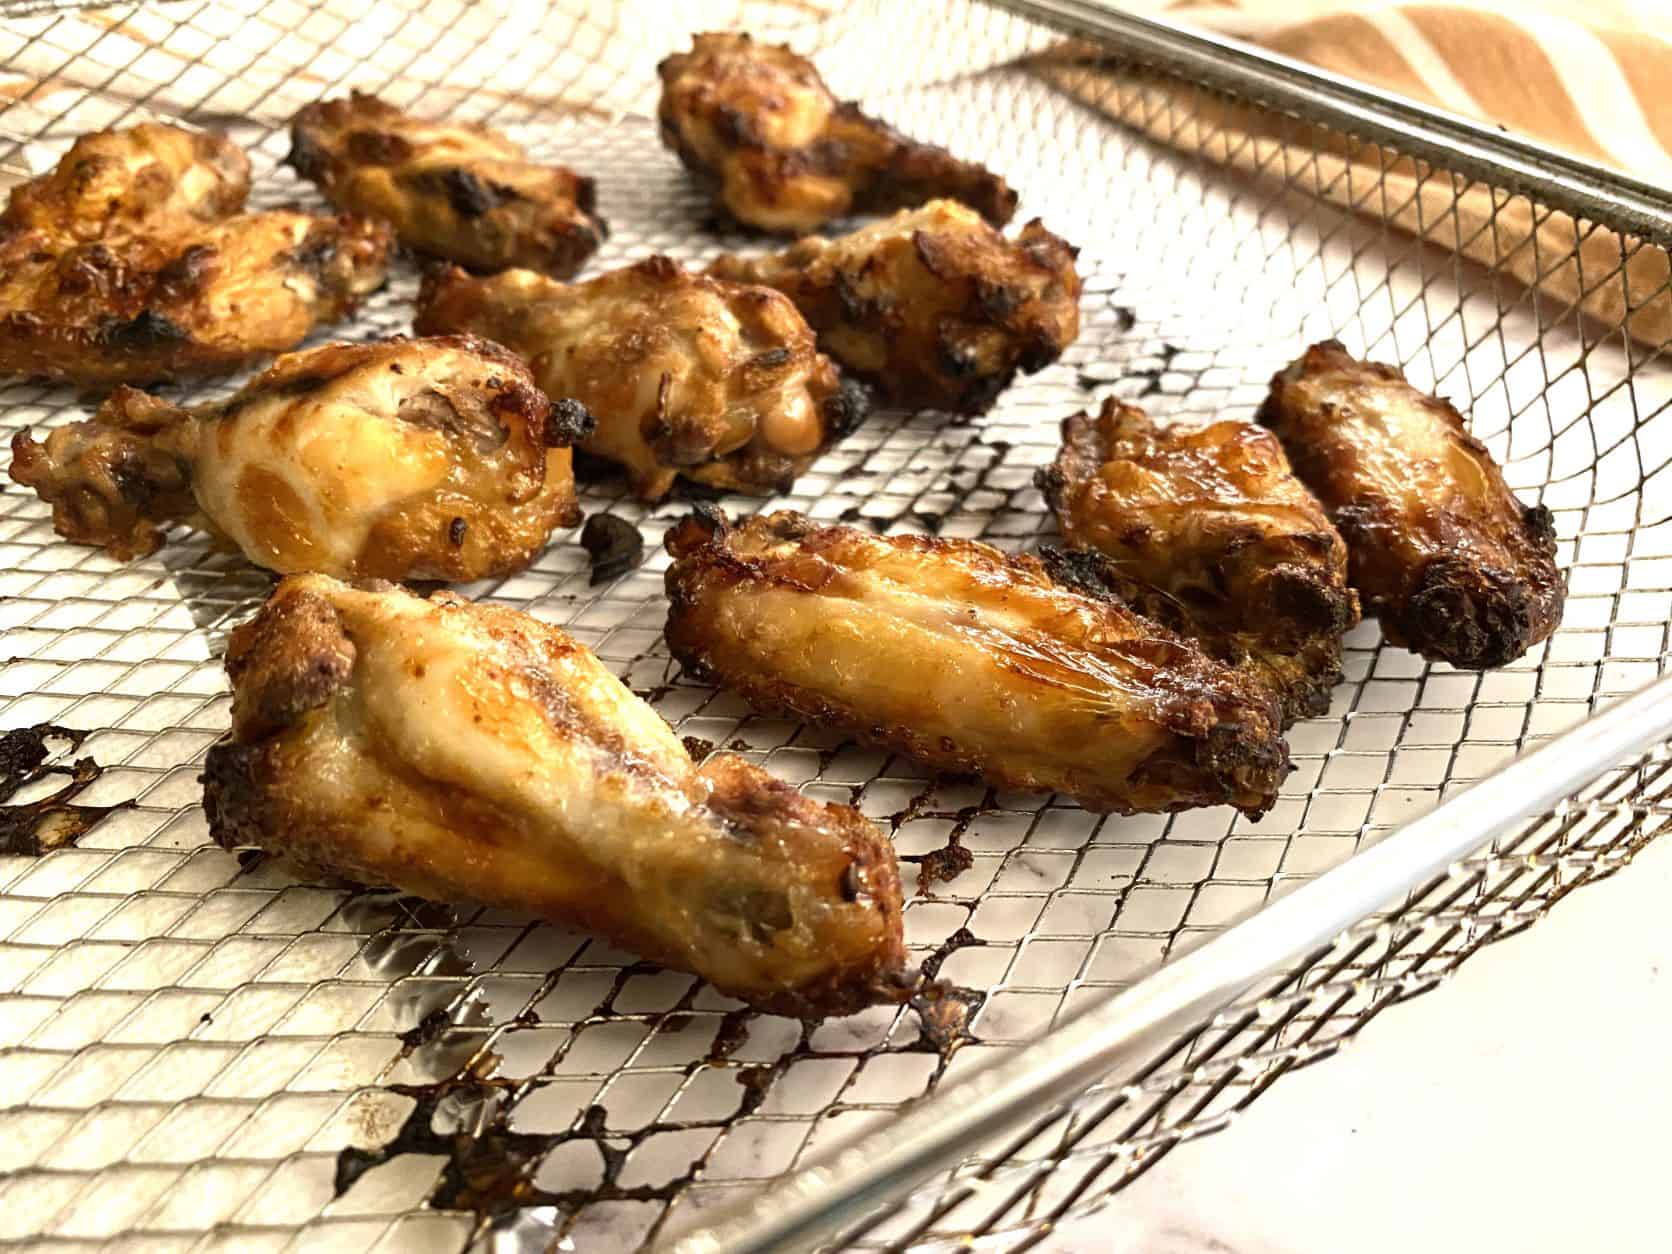 Brined chicken wings in a wire basket